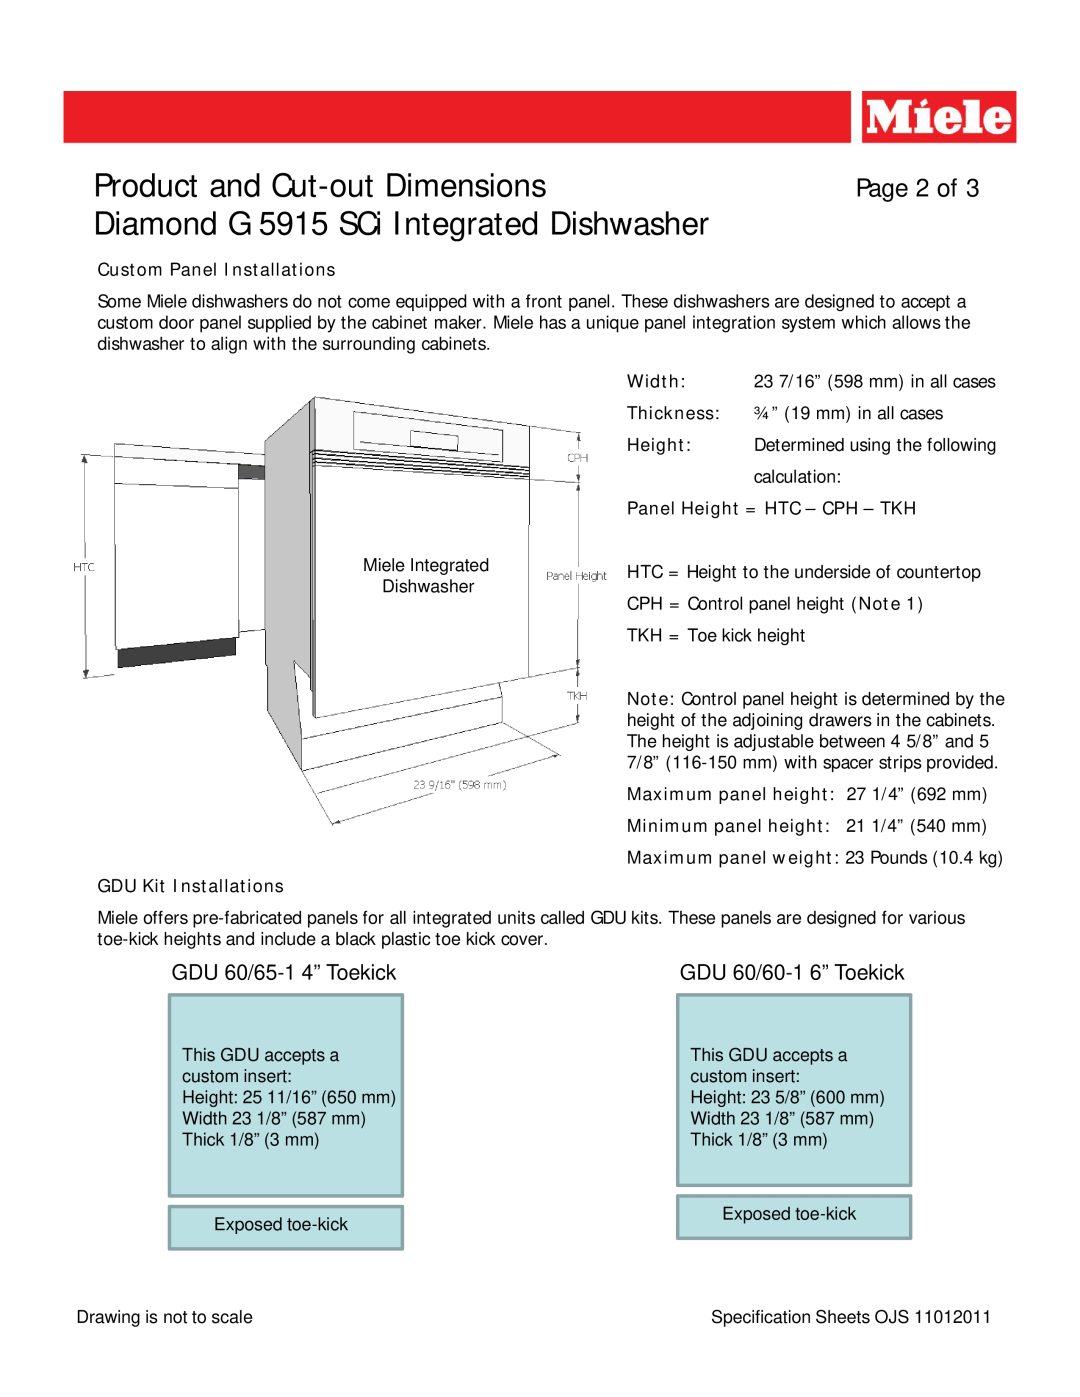 Miele G 5915 SCI Page 2 of, Product and Cut-outDimensions, Diamond G 5915 SCi Integrated Dishwasher, GDU 60/65-14” Toekick 